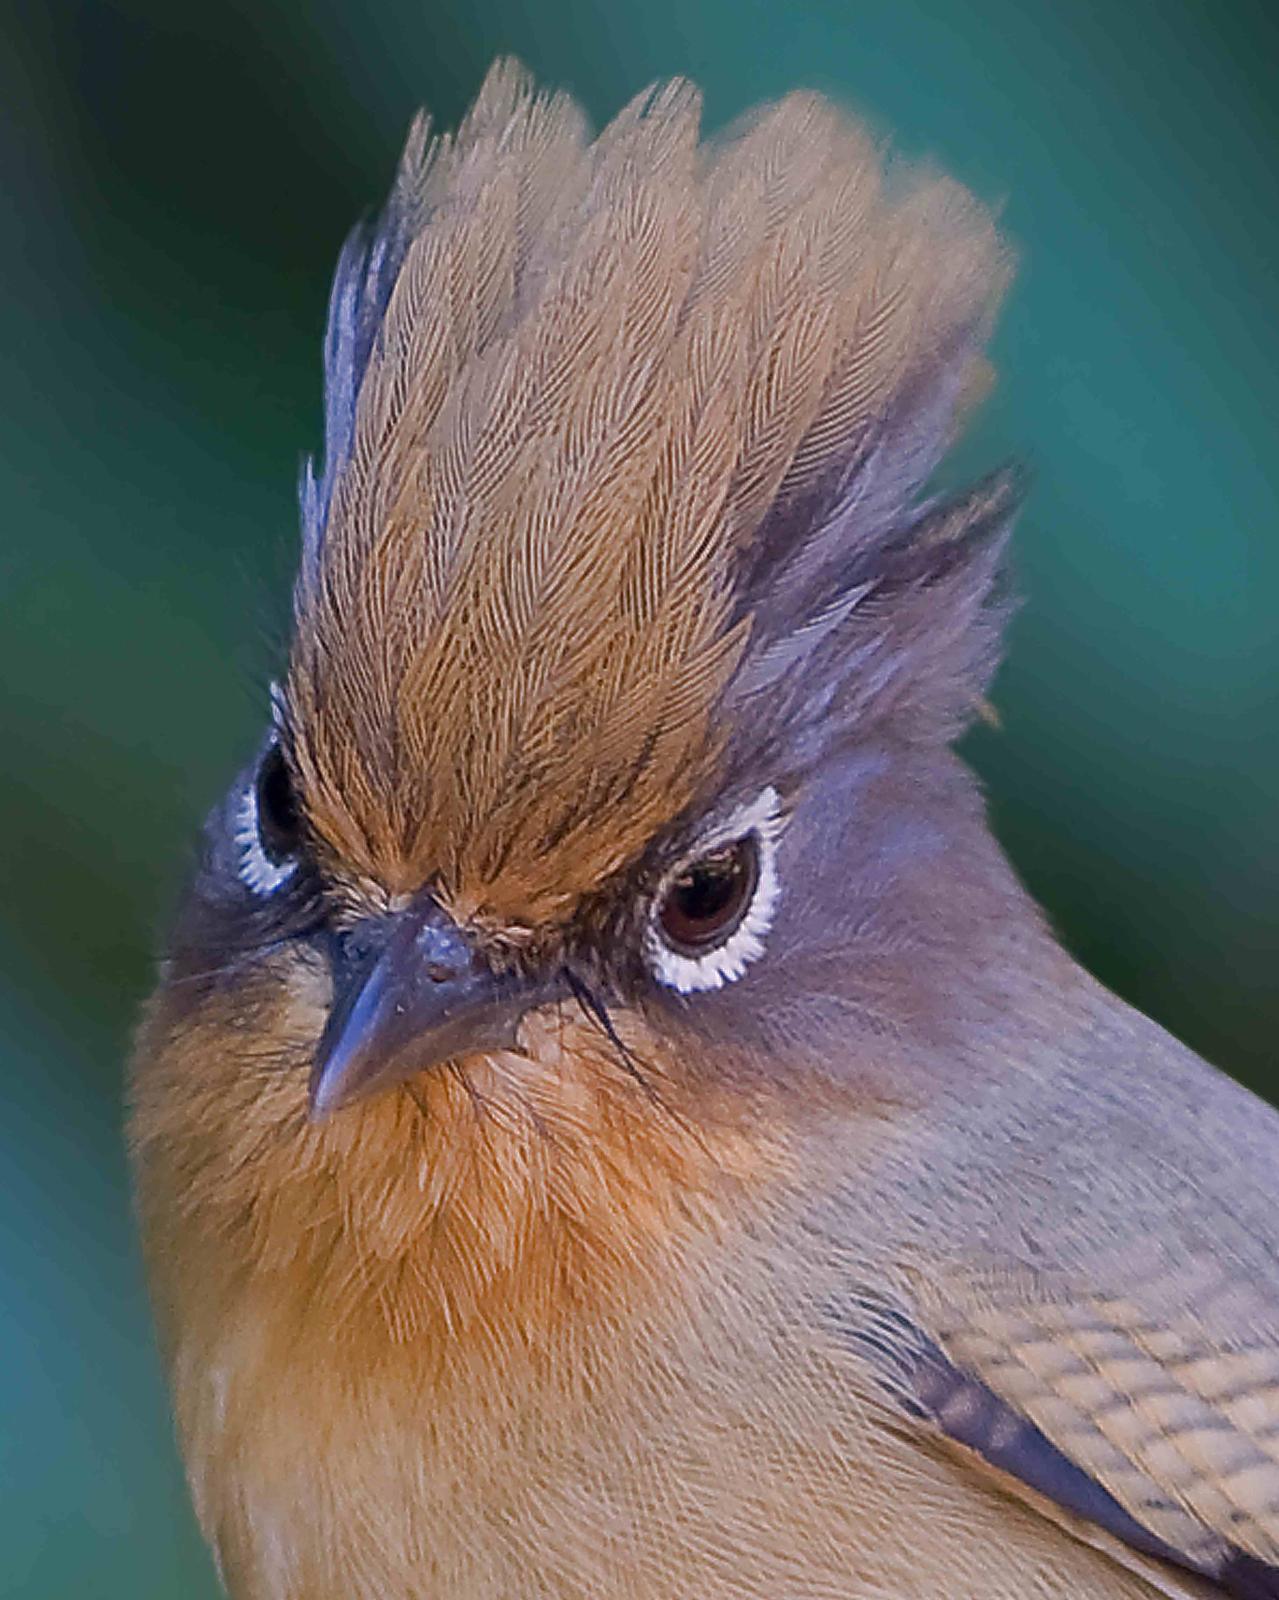 Spectacled Barwing Photo by Alex Vargas